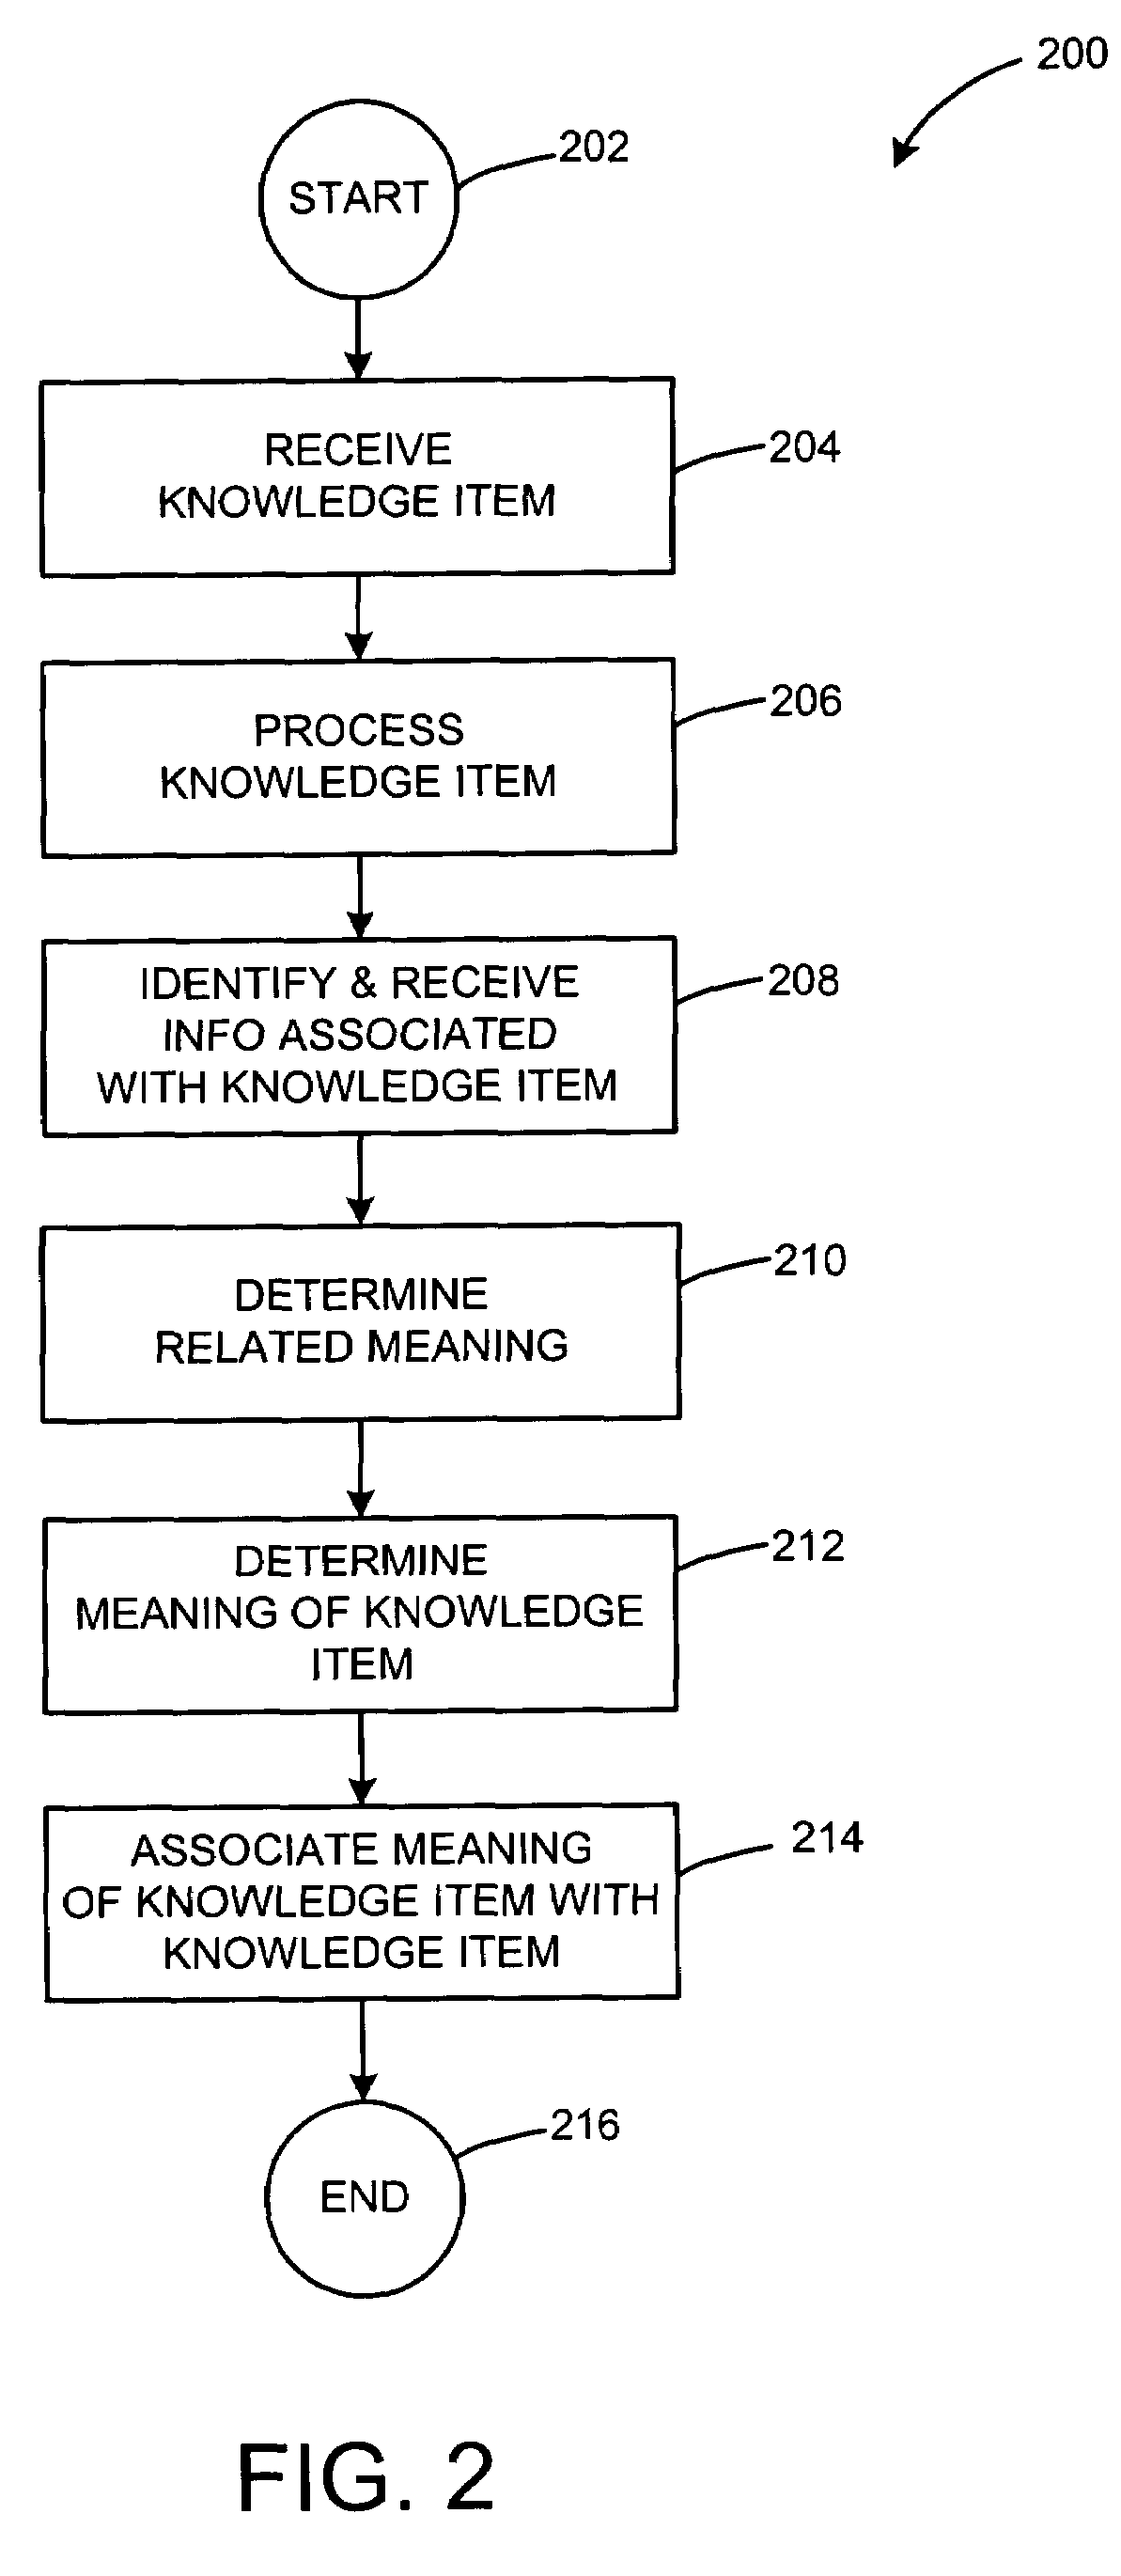 Determining a meaning of a knowledge item using document-based information